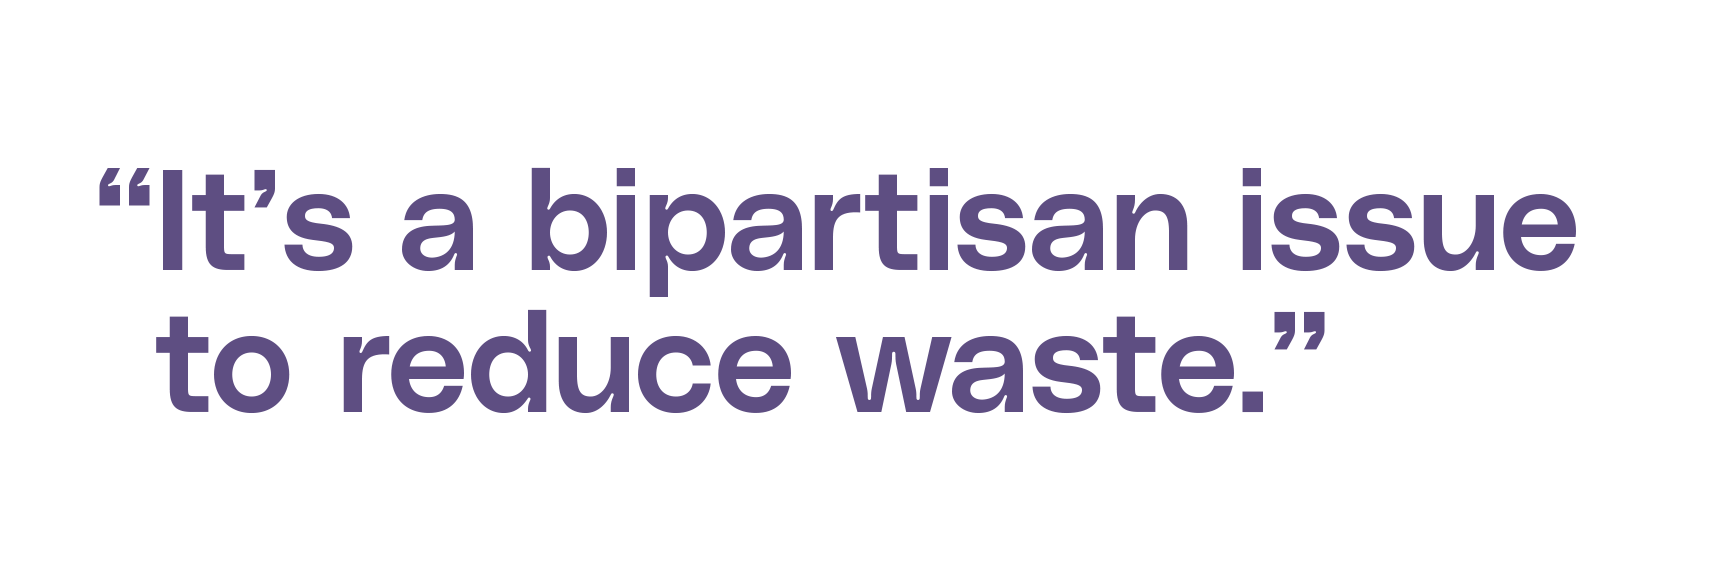 “It’s a bipartisan issue to reduce waste.”